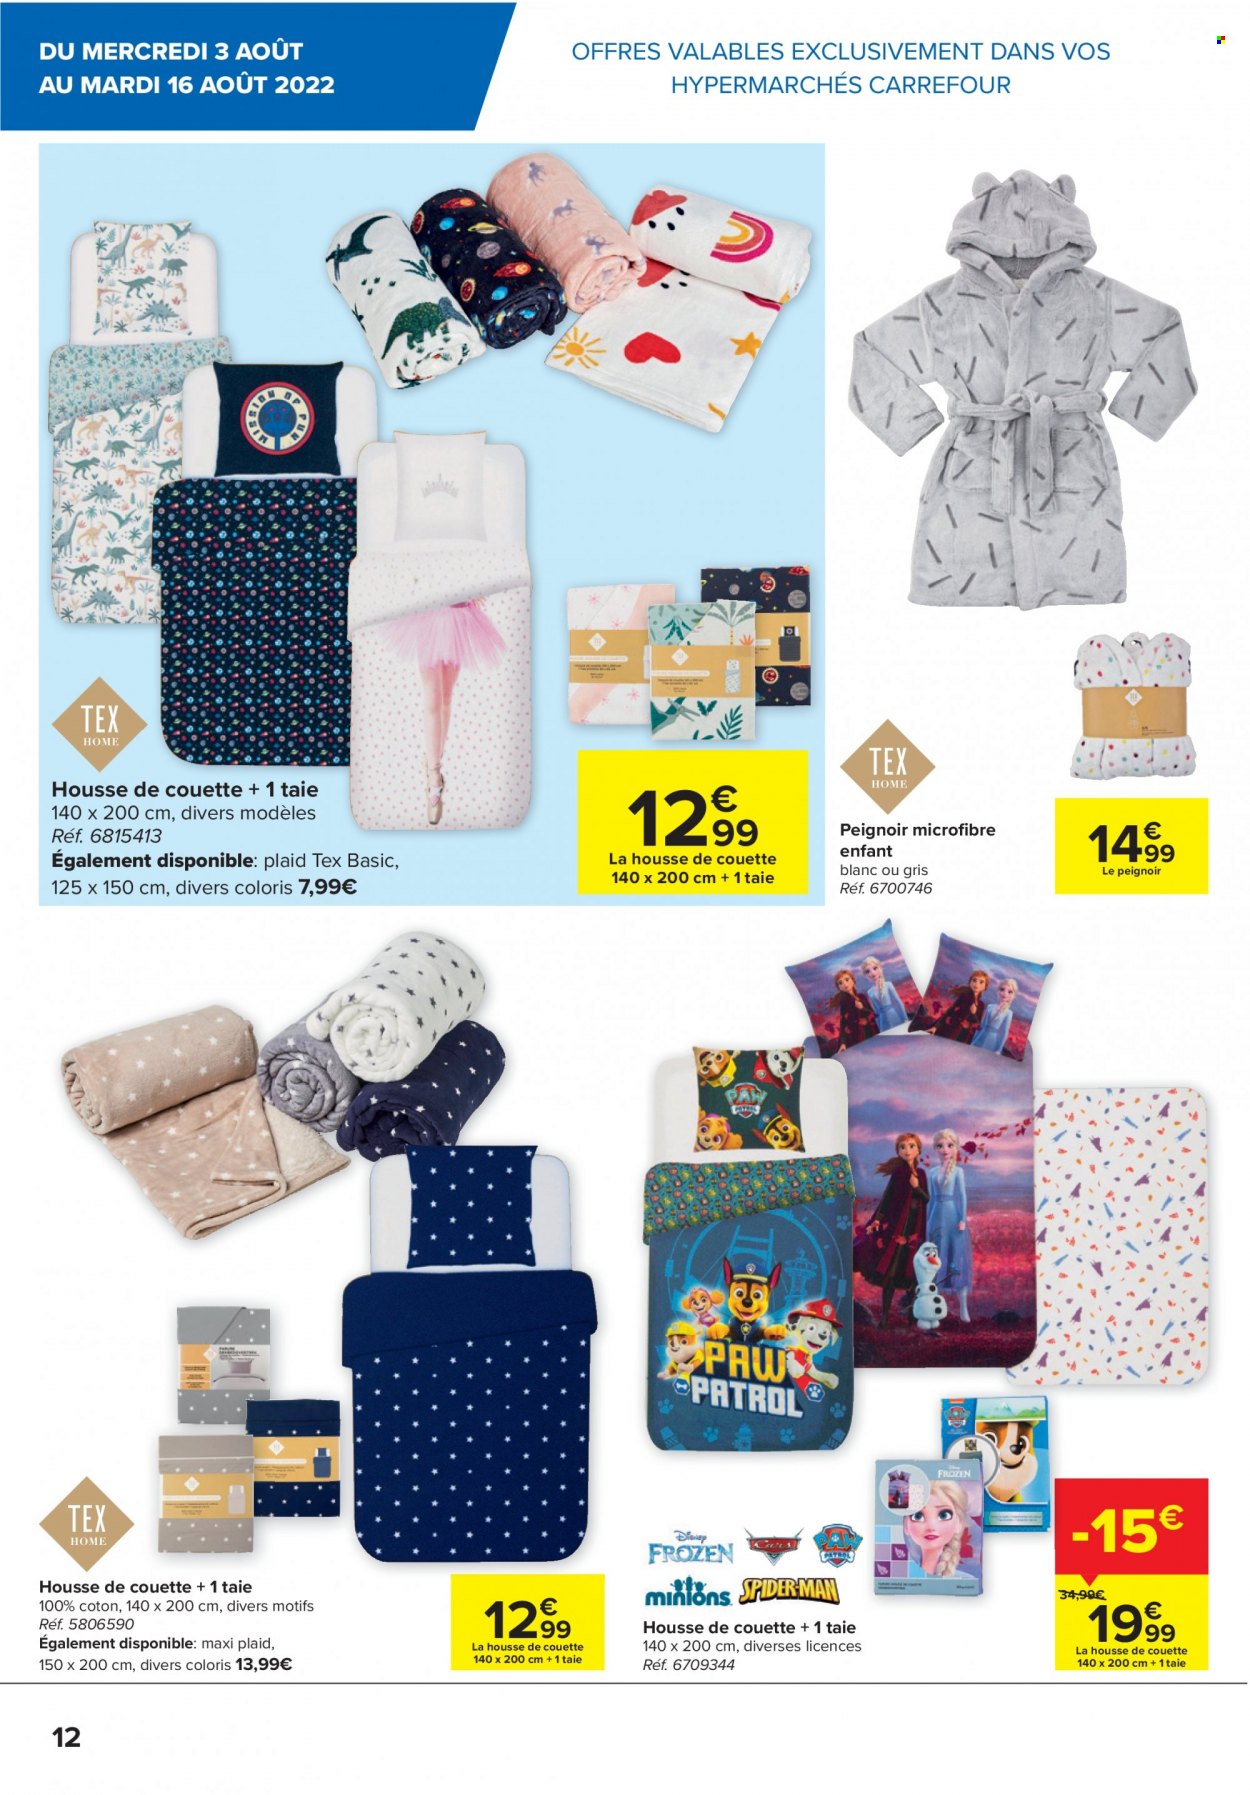 Catalogue Carrefour hypermarkt - 3.8.2022 - 16.8.2022. Page 12.